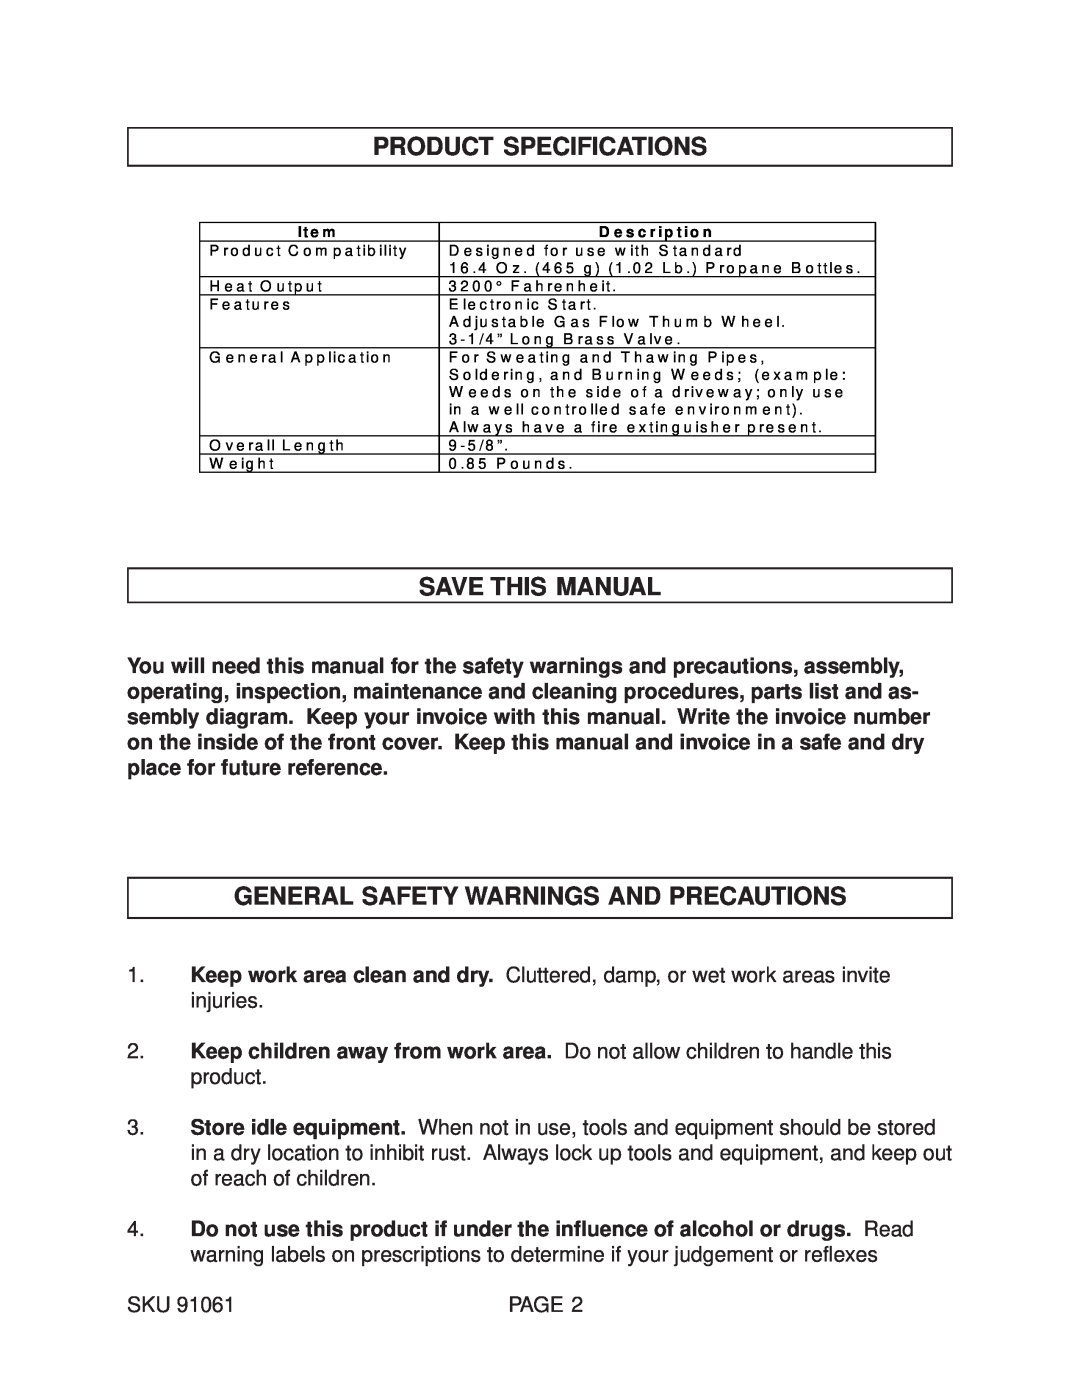 Harbor Freight Tools 91061 Product Specifications, Save This Manual, General Safety Warnings And Precautions 